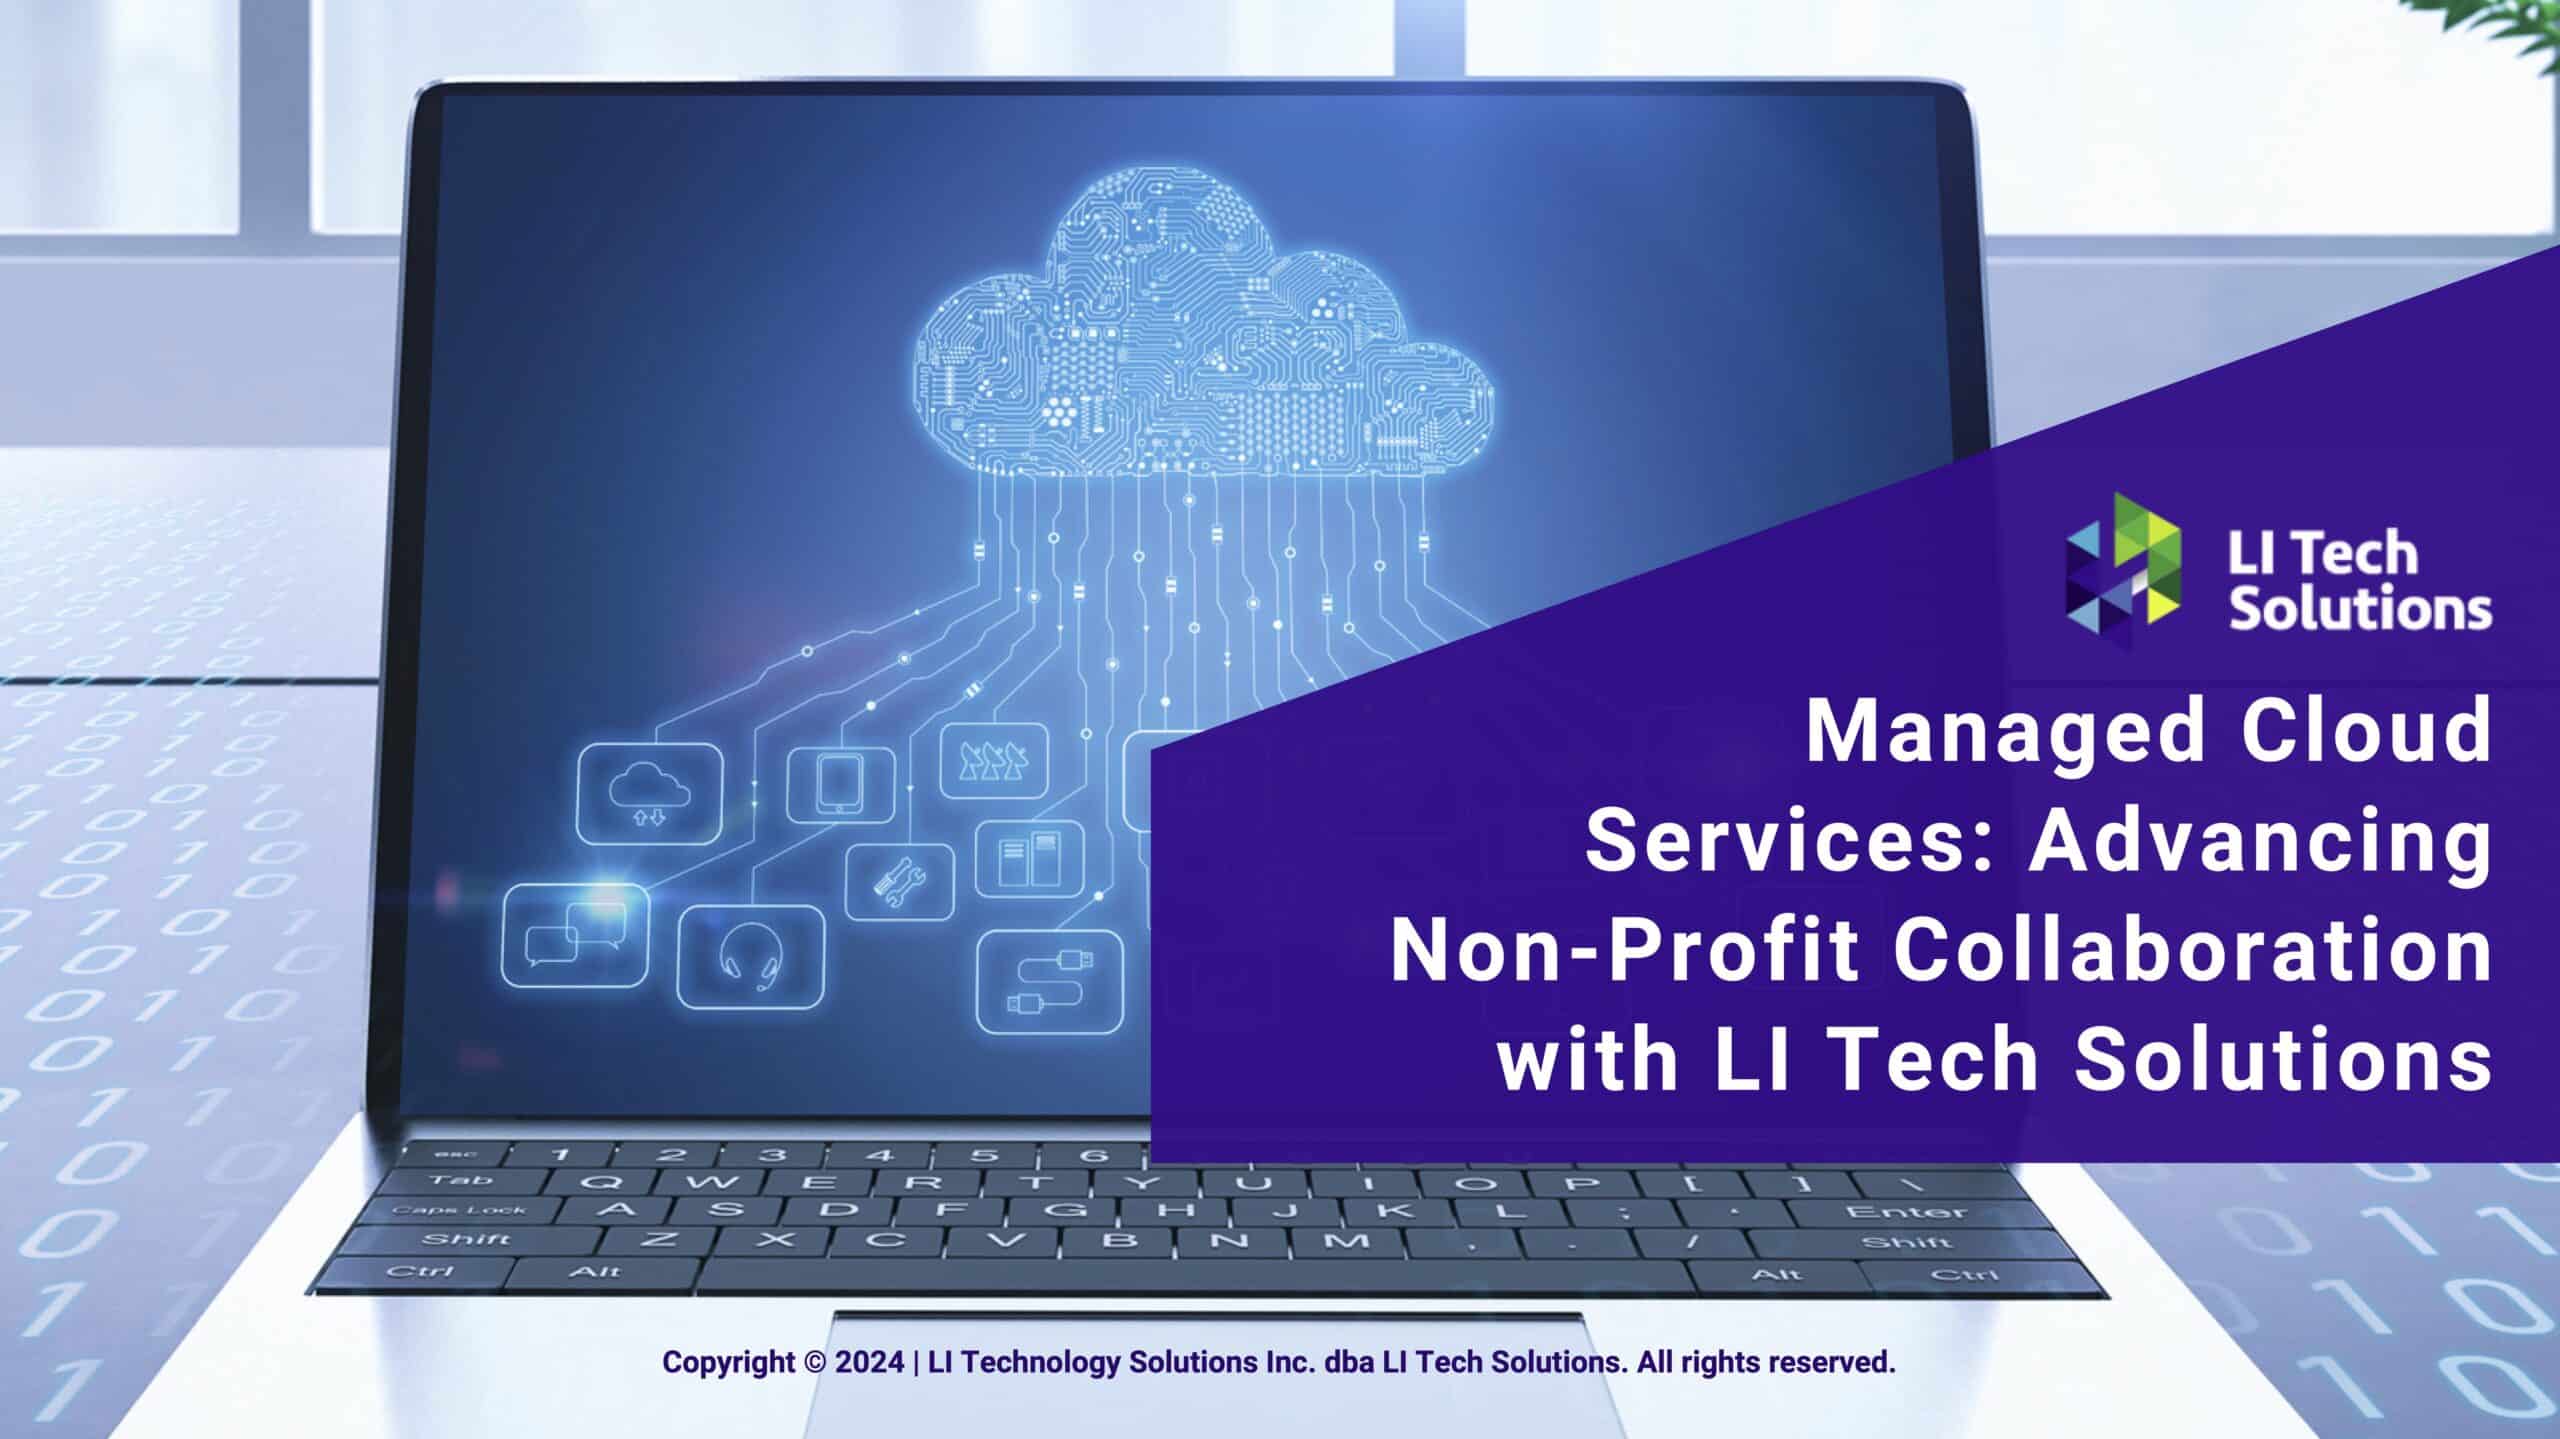 Featured: Cloud computing concept on laptop screen in office- Managed Cloud Services: Advancing Non-Profit Collaboration with LI Tech Solutions